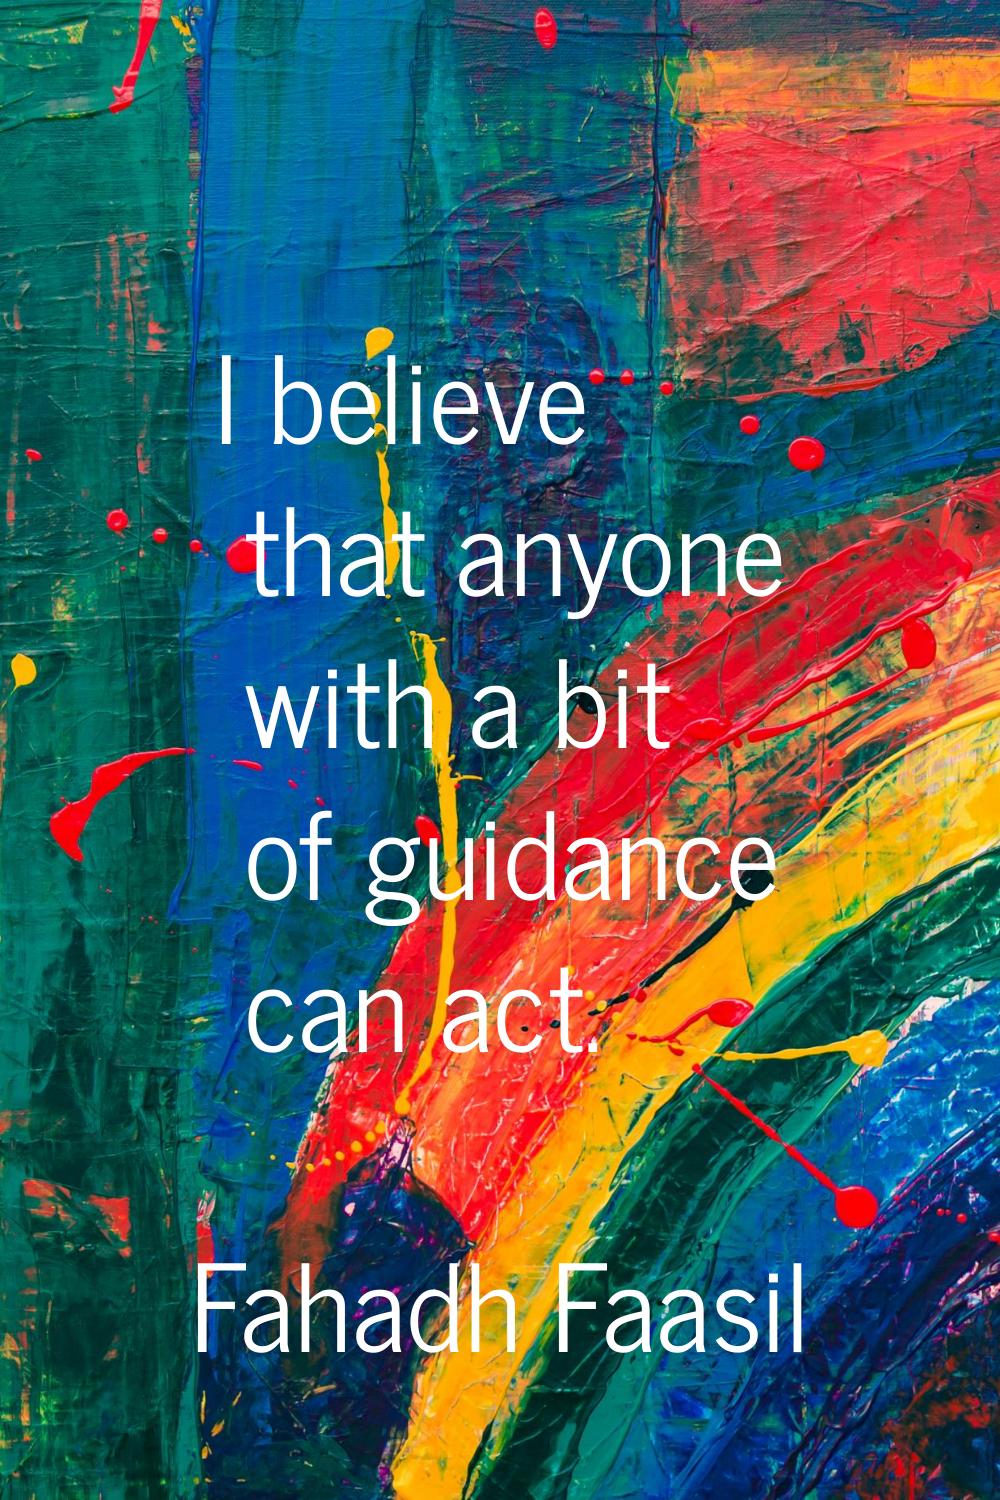 I believe that anyone with a bit of guidance can act.